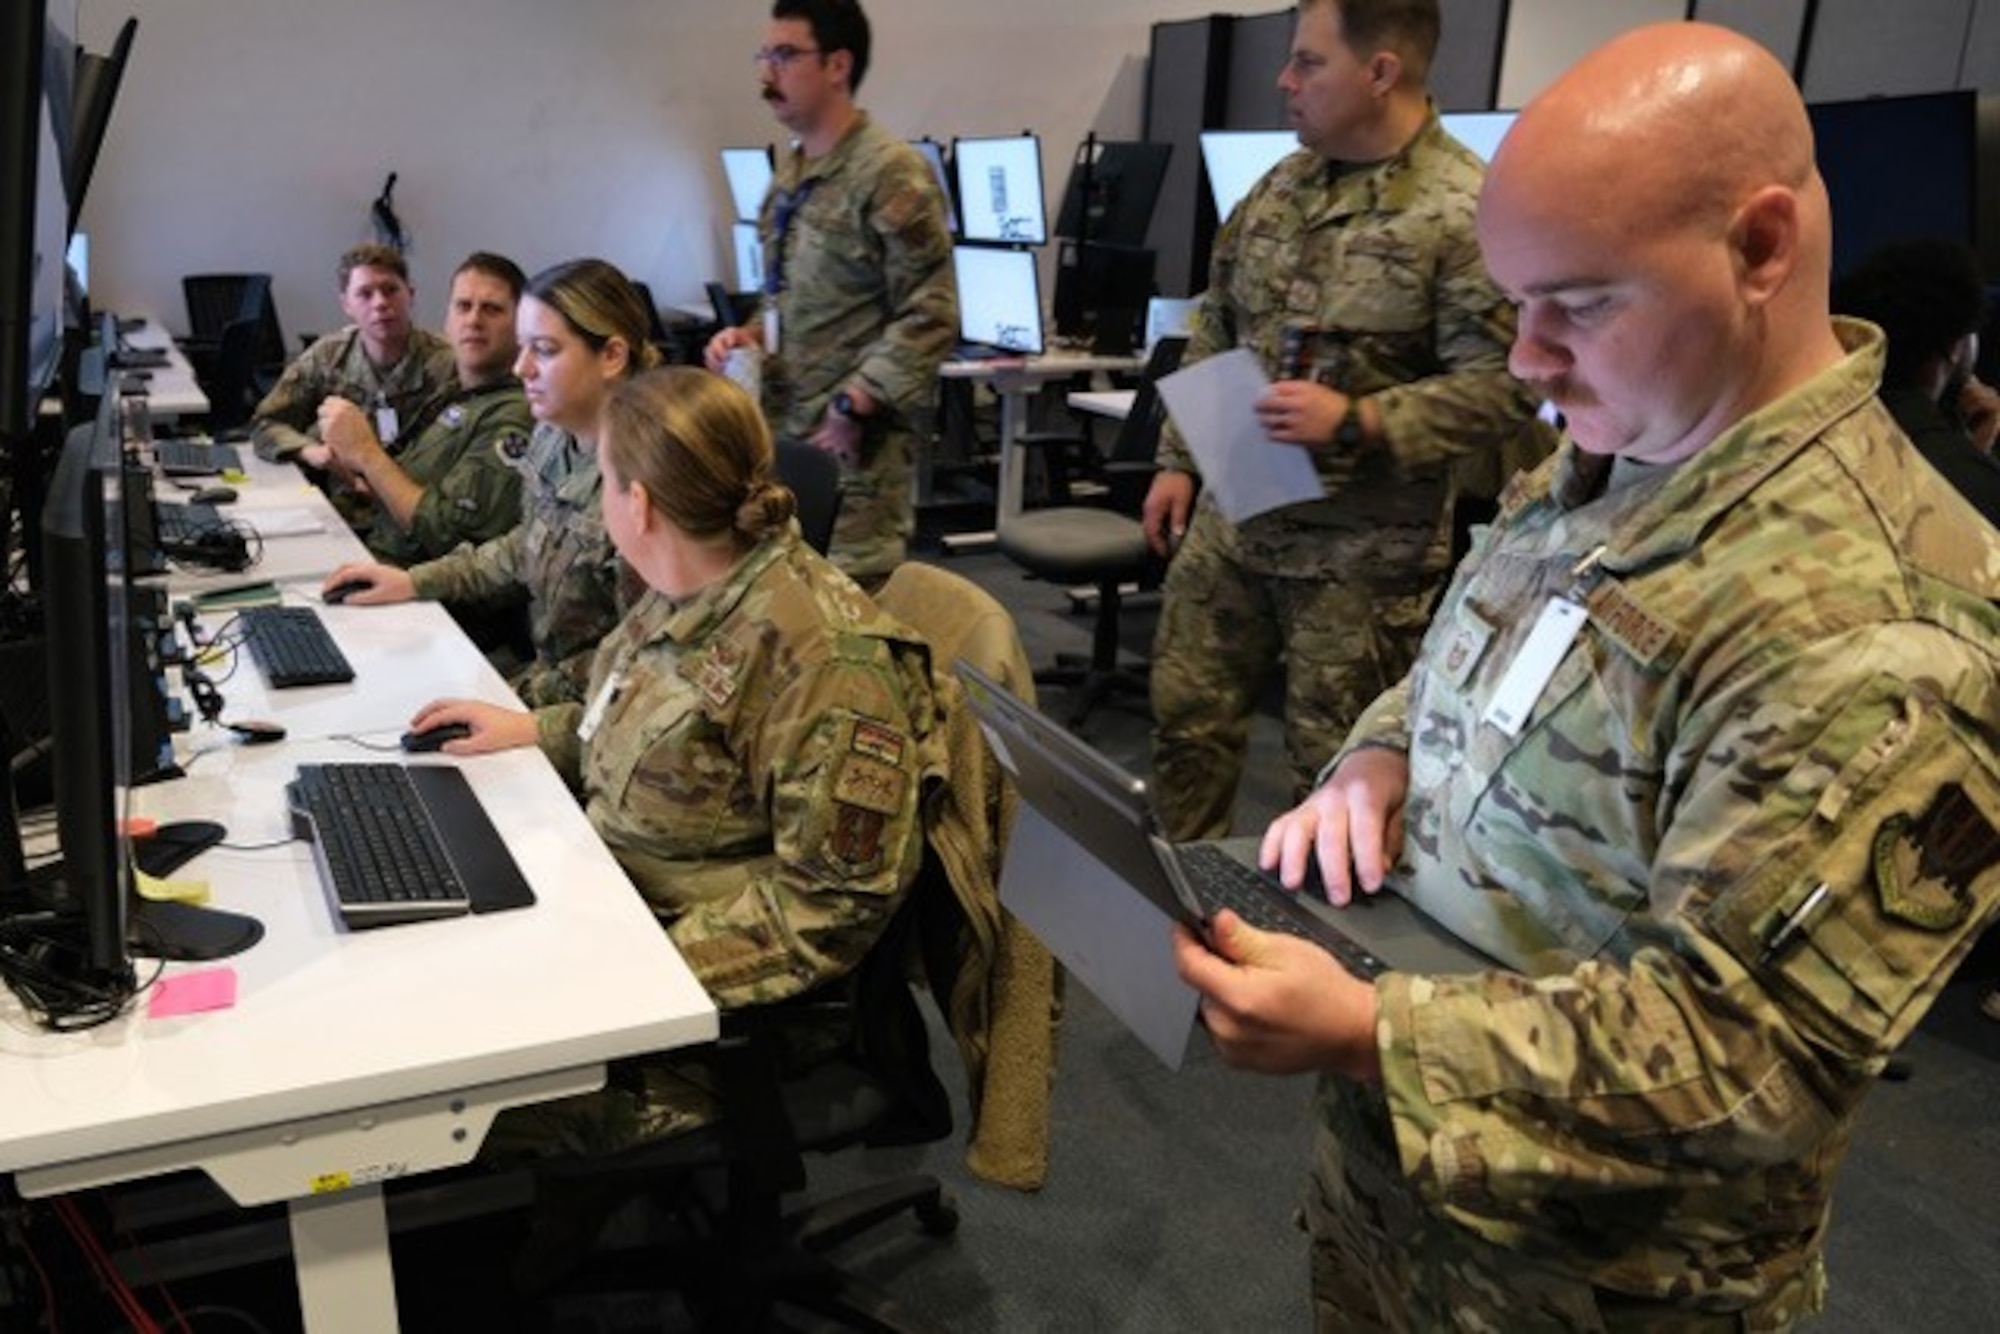 photo of uniformed military members working in a warehouse filled with computers and screens.